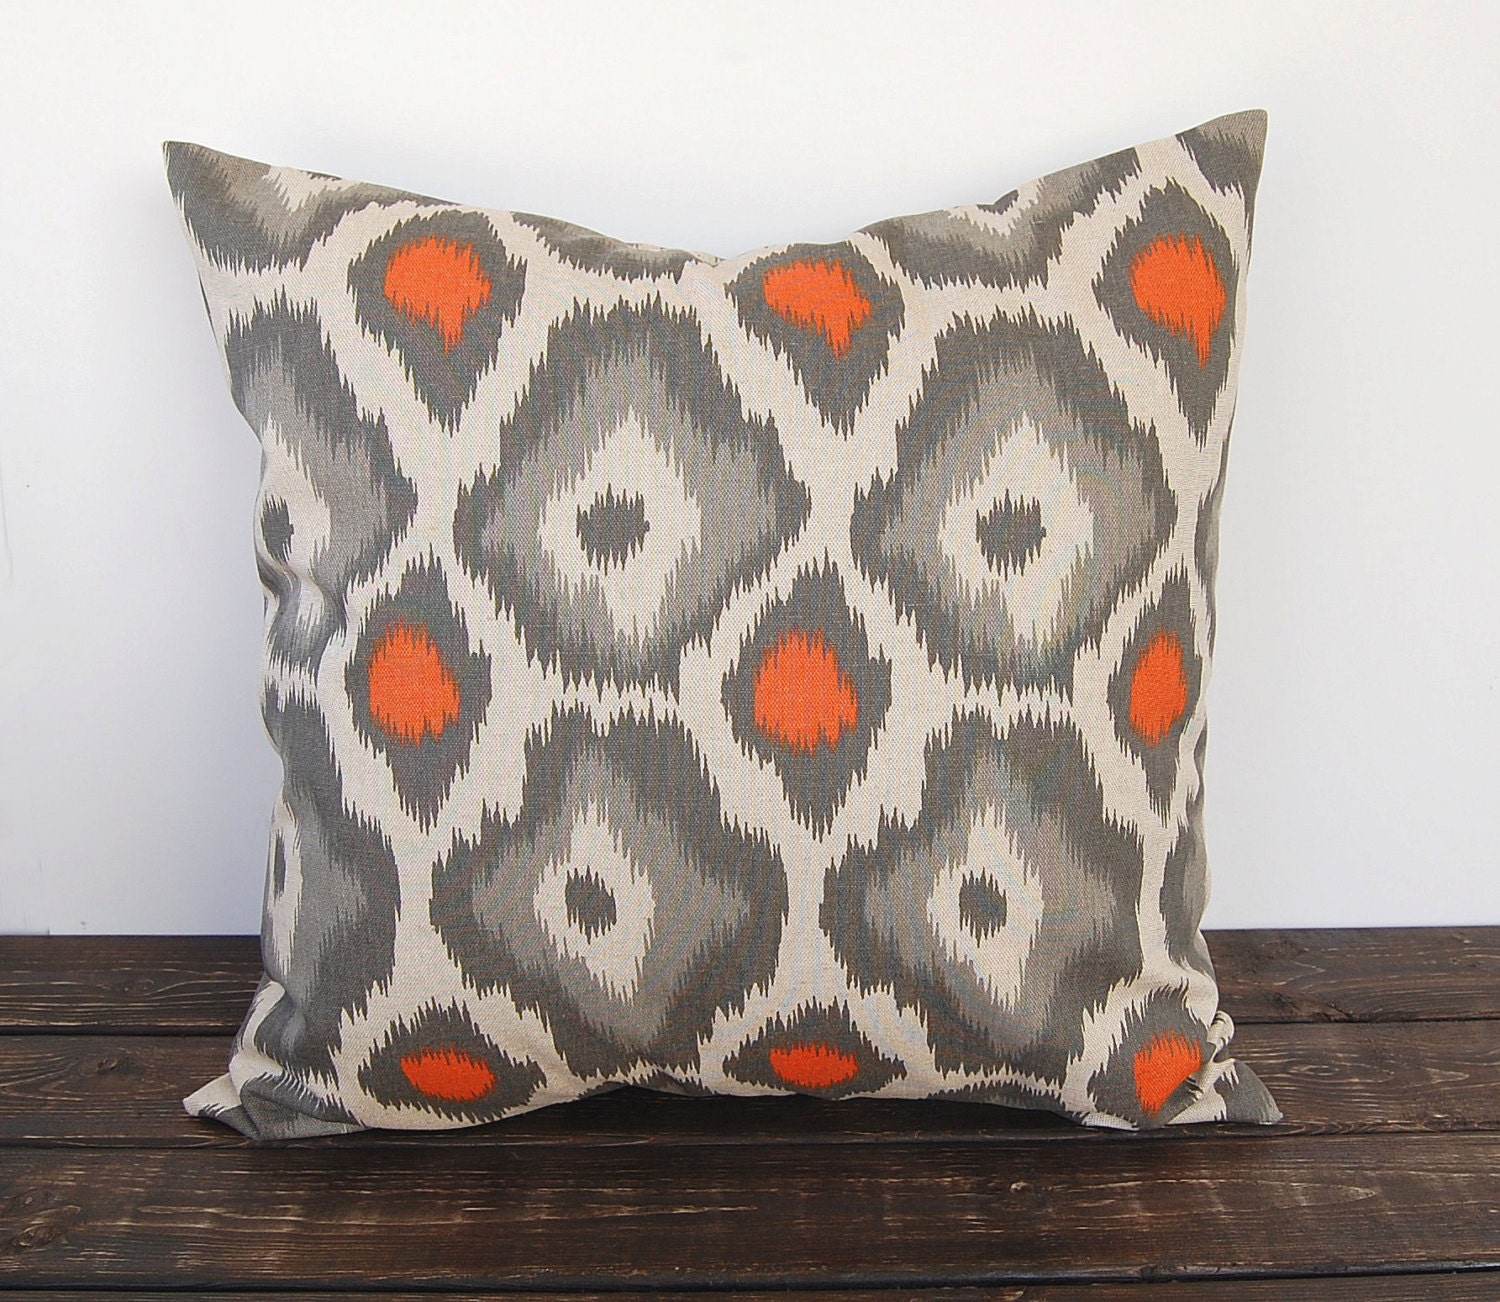 Ikat Pillow cover 16" x 16" one orange gray and oatmeal cushion cover decorative throw pillow covers peacock modern pillow